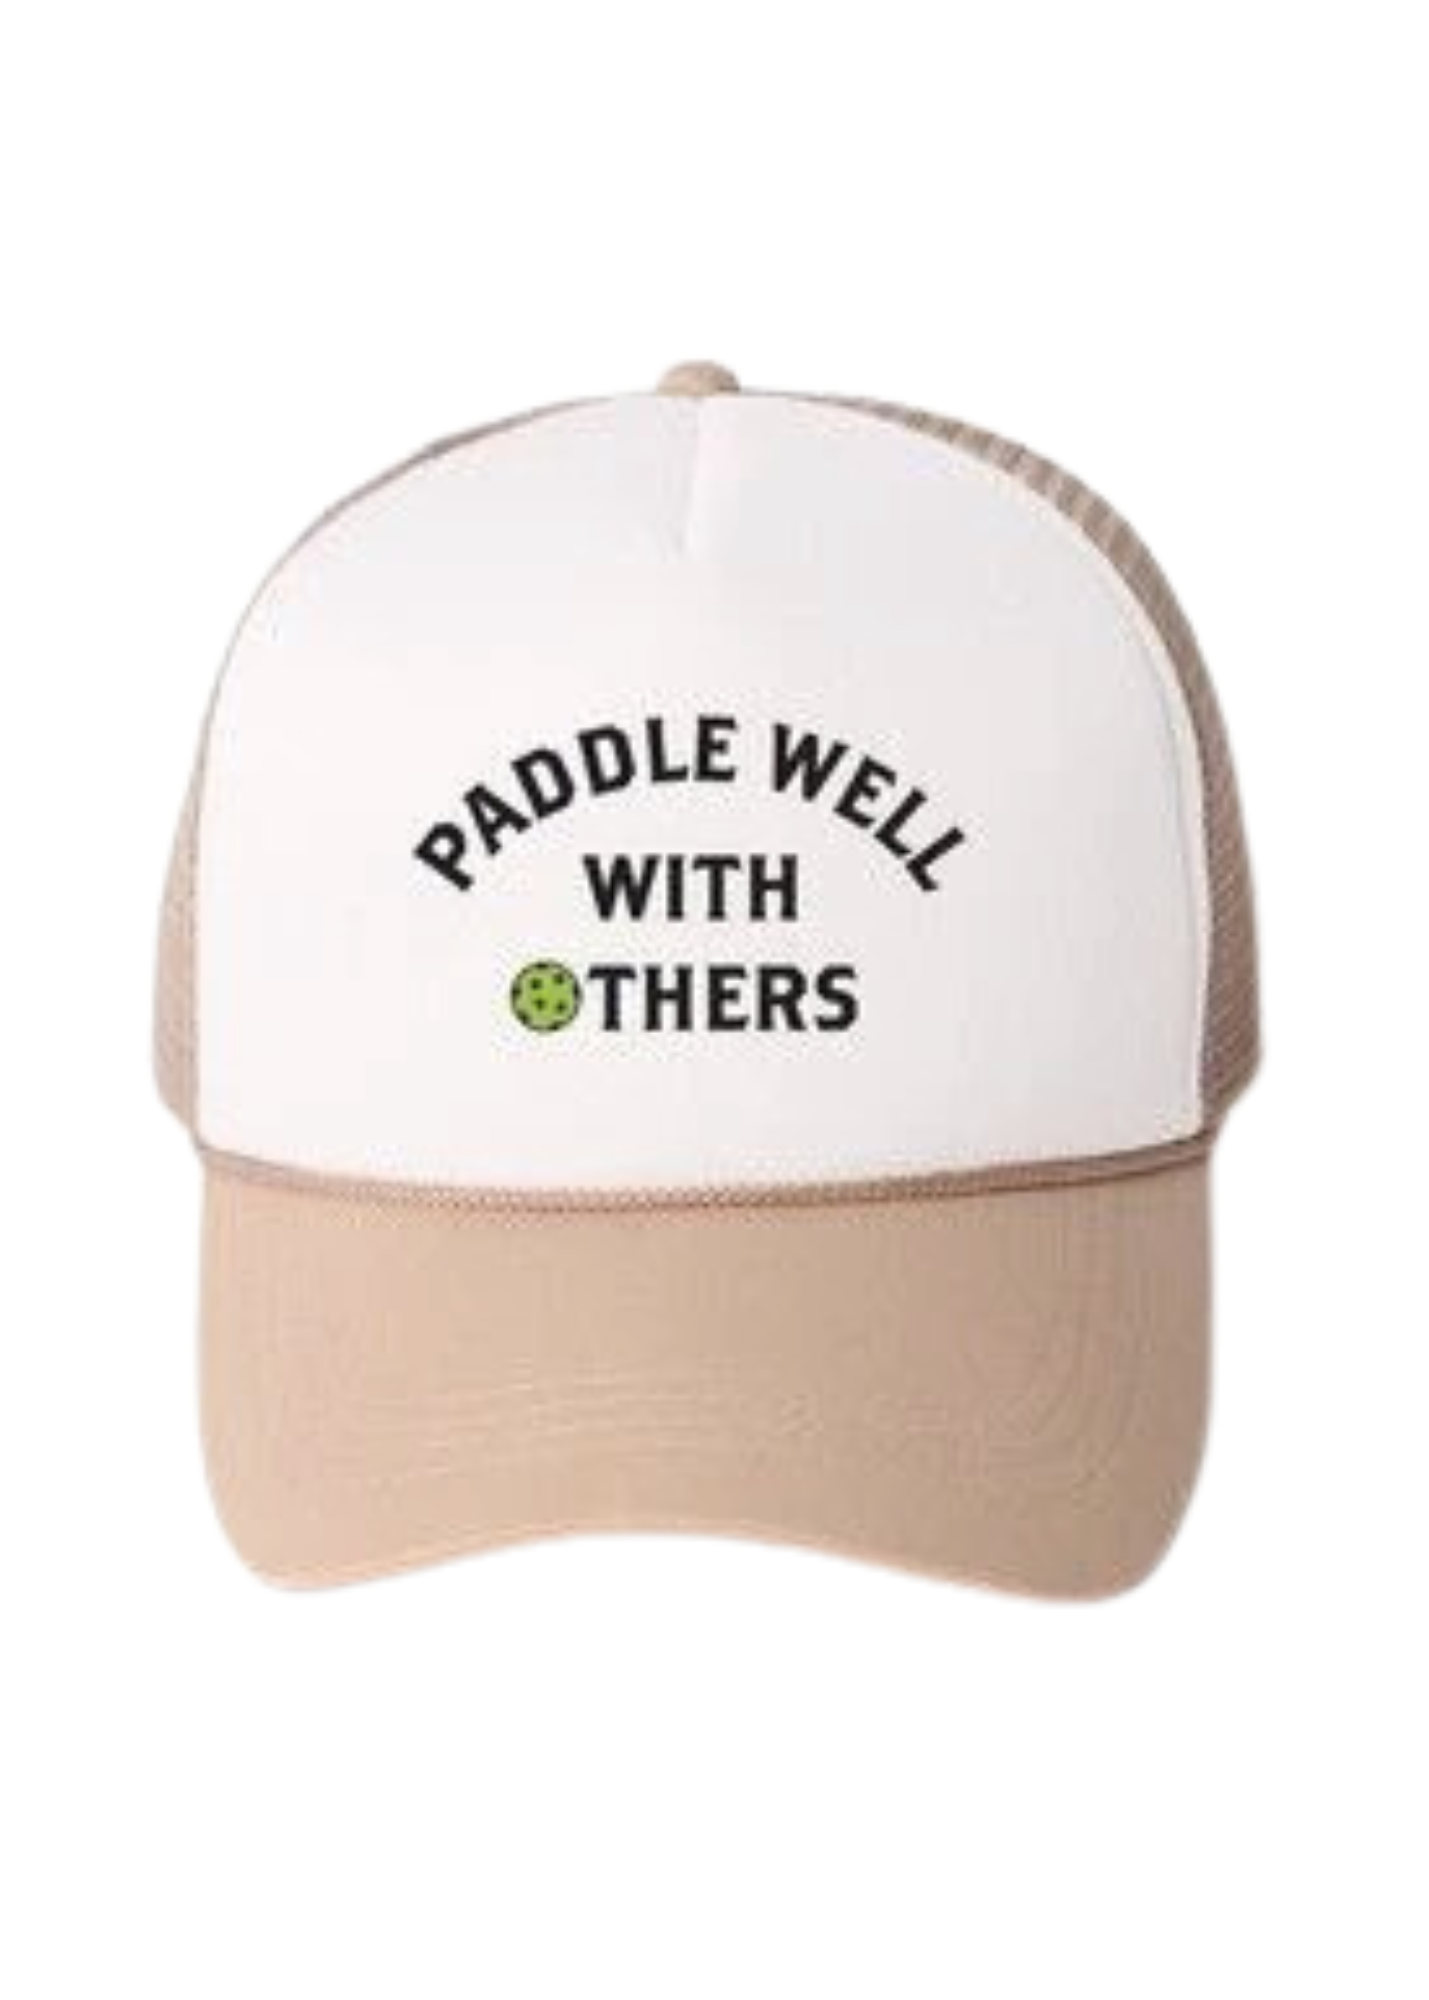 Paddle Well With Others Cap Beige